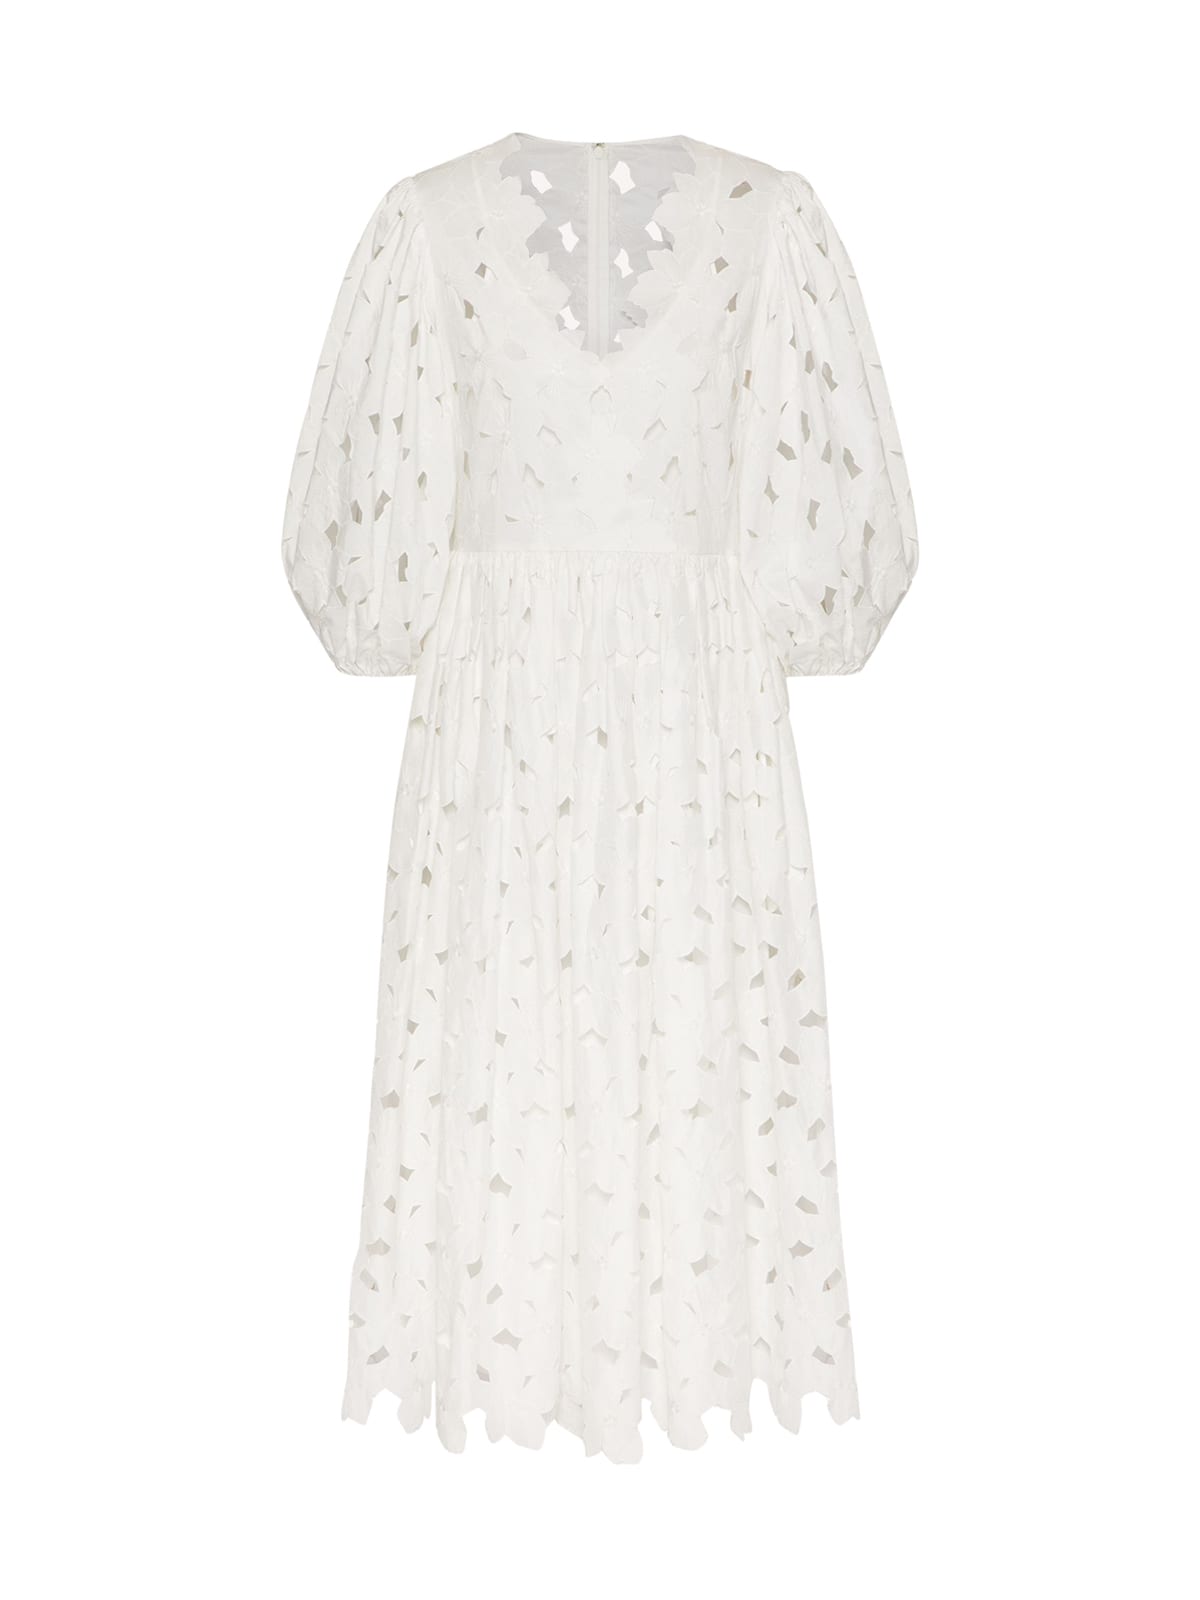 RED Valentino Cotton Poplin Dress With Cut-out Embroidery